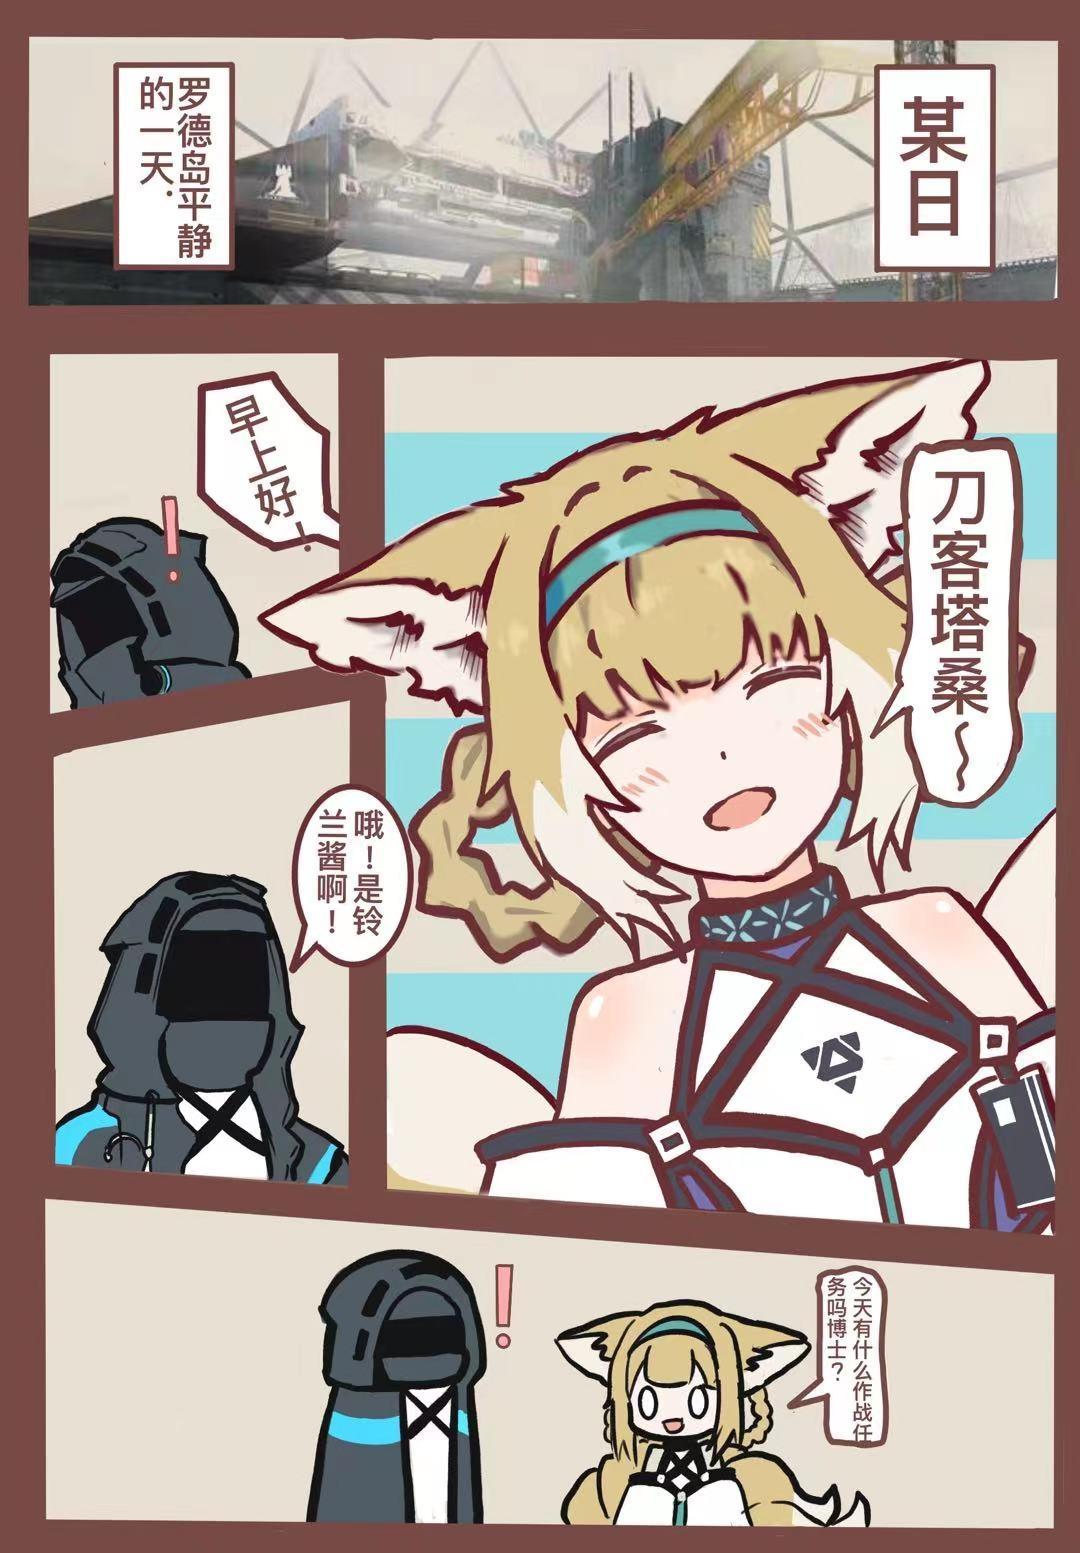 Strip 铃兰の单人作战记录 - Arknights Cougar - Page 2